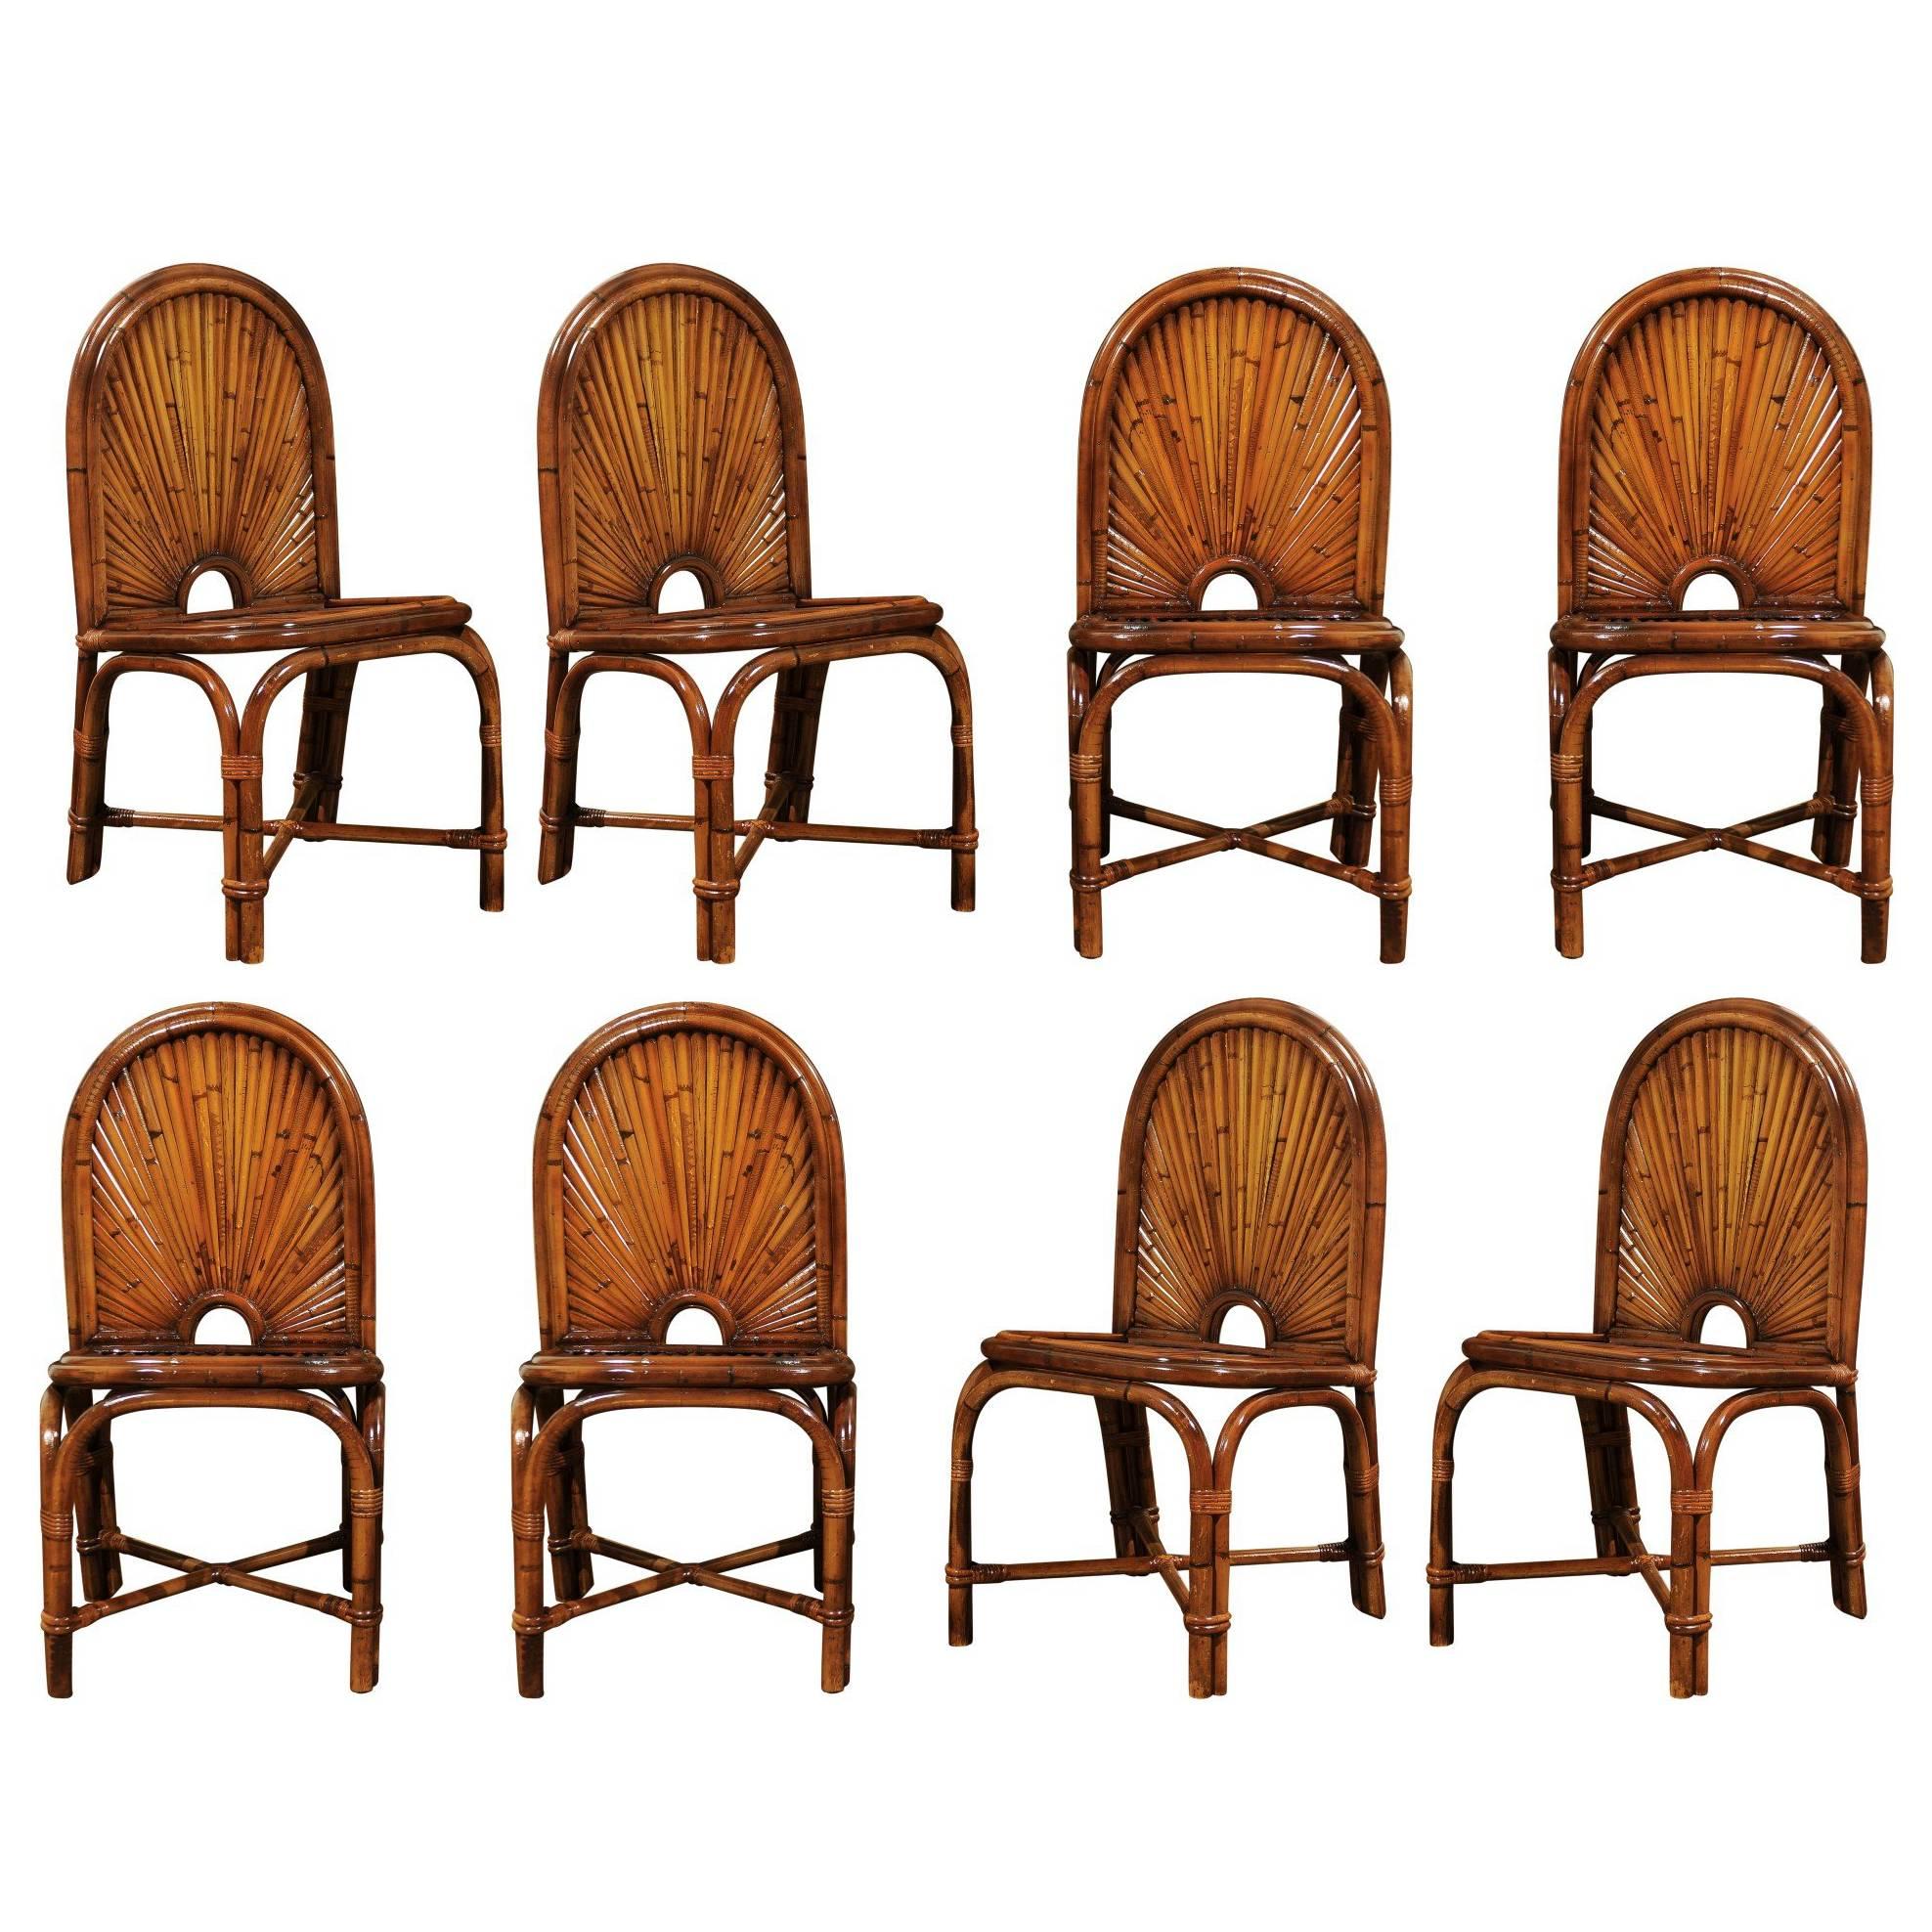 Spectacular Restored Set of Eight Rattan and Bamboo Chairs, circa 1975